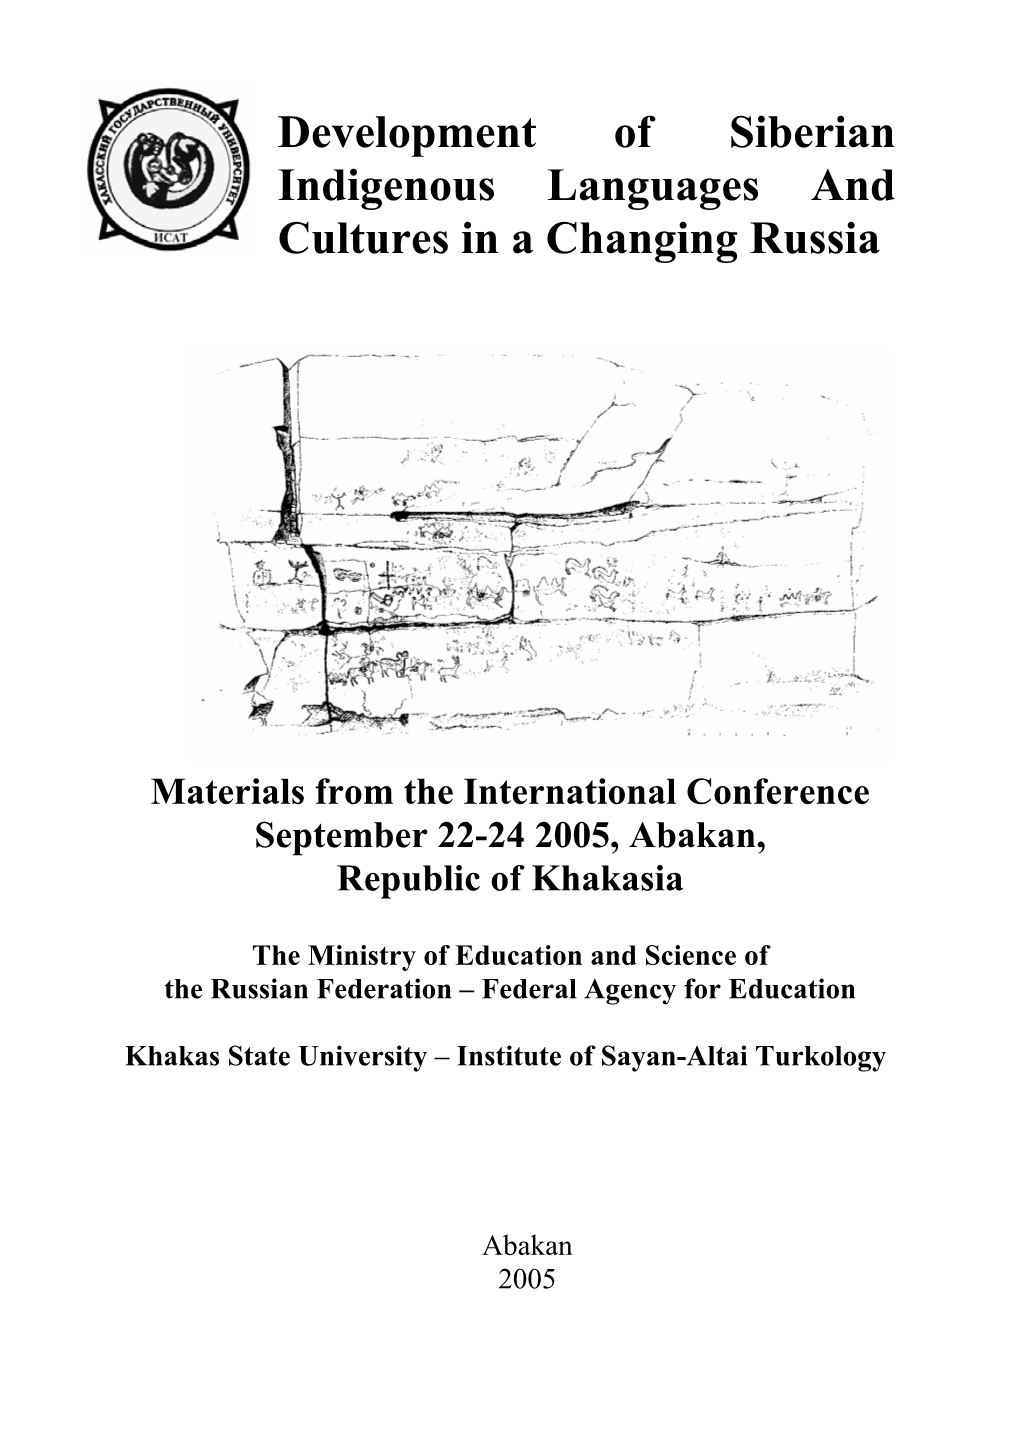 Development of Siberian Indigenous Languages and Cultures in a Changing Russia